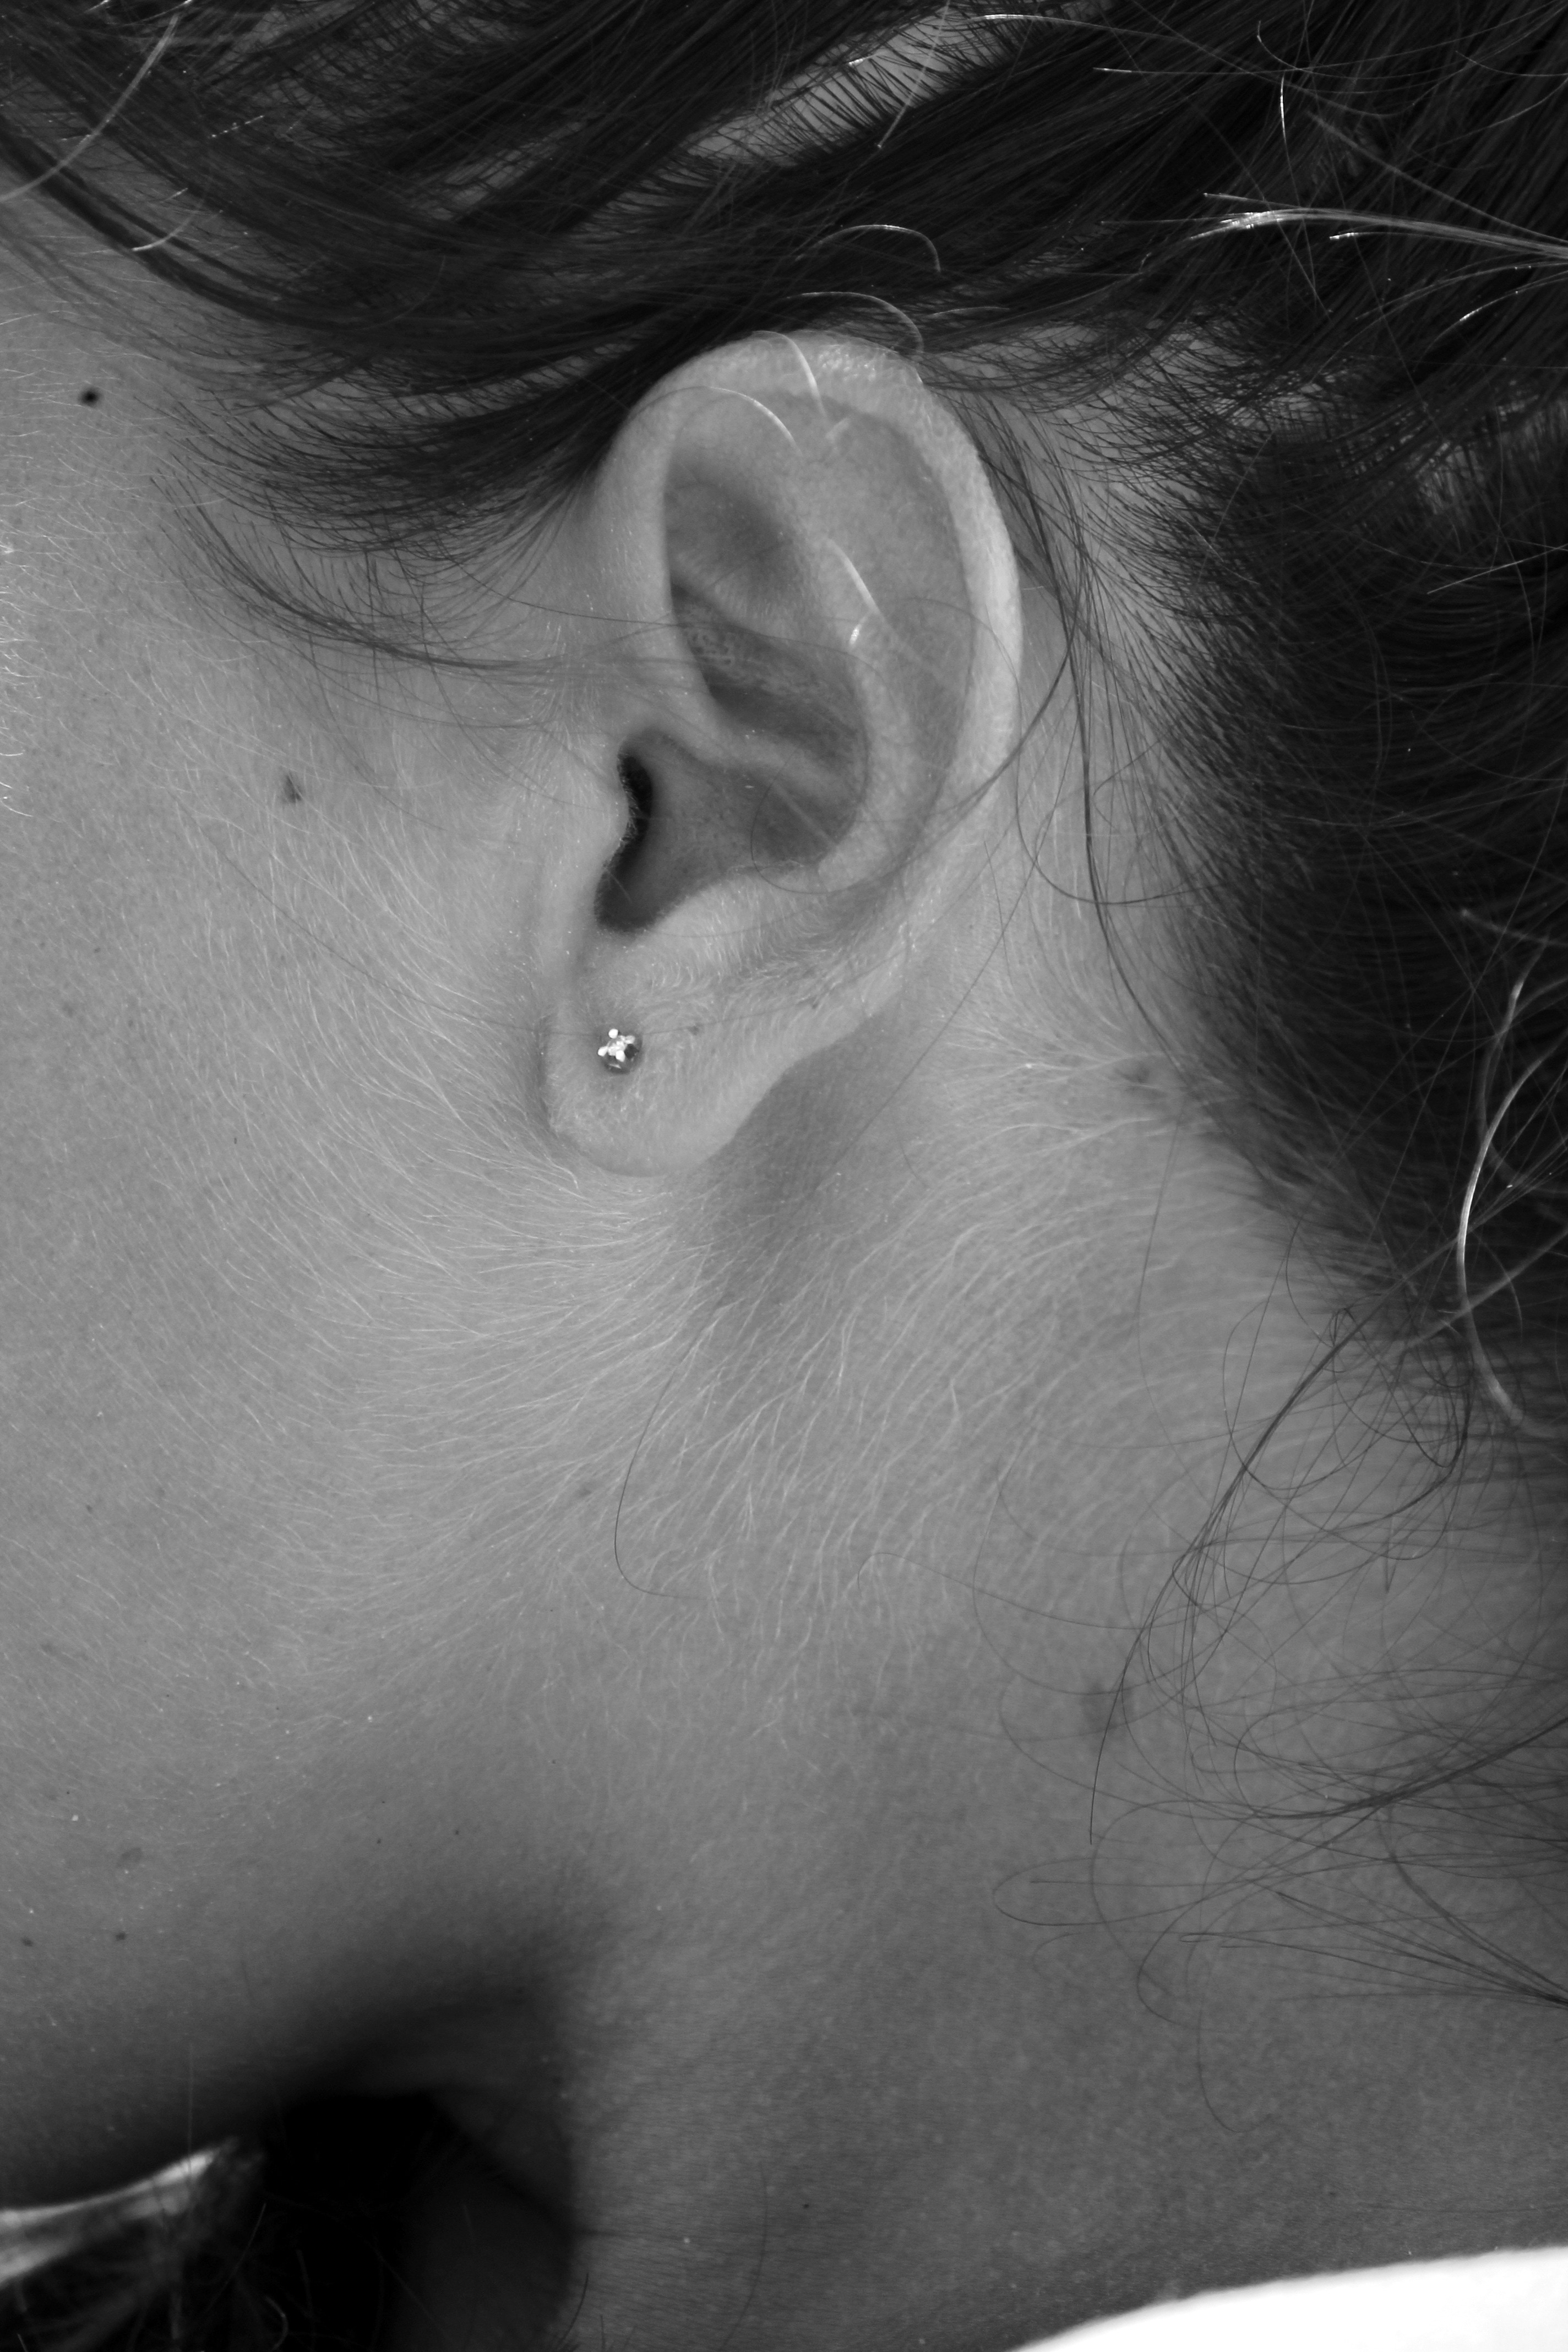 Earring, Face, Ear, Neck, Girl, Hair, human body part, one person